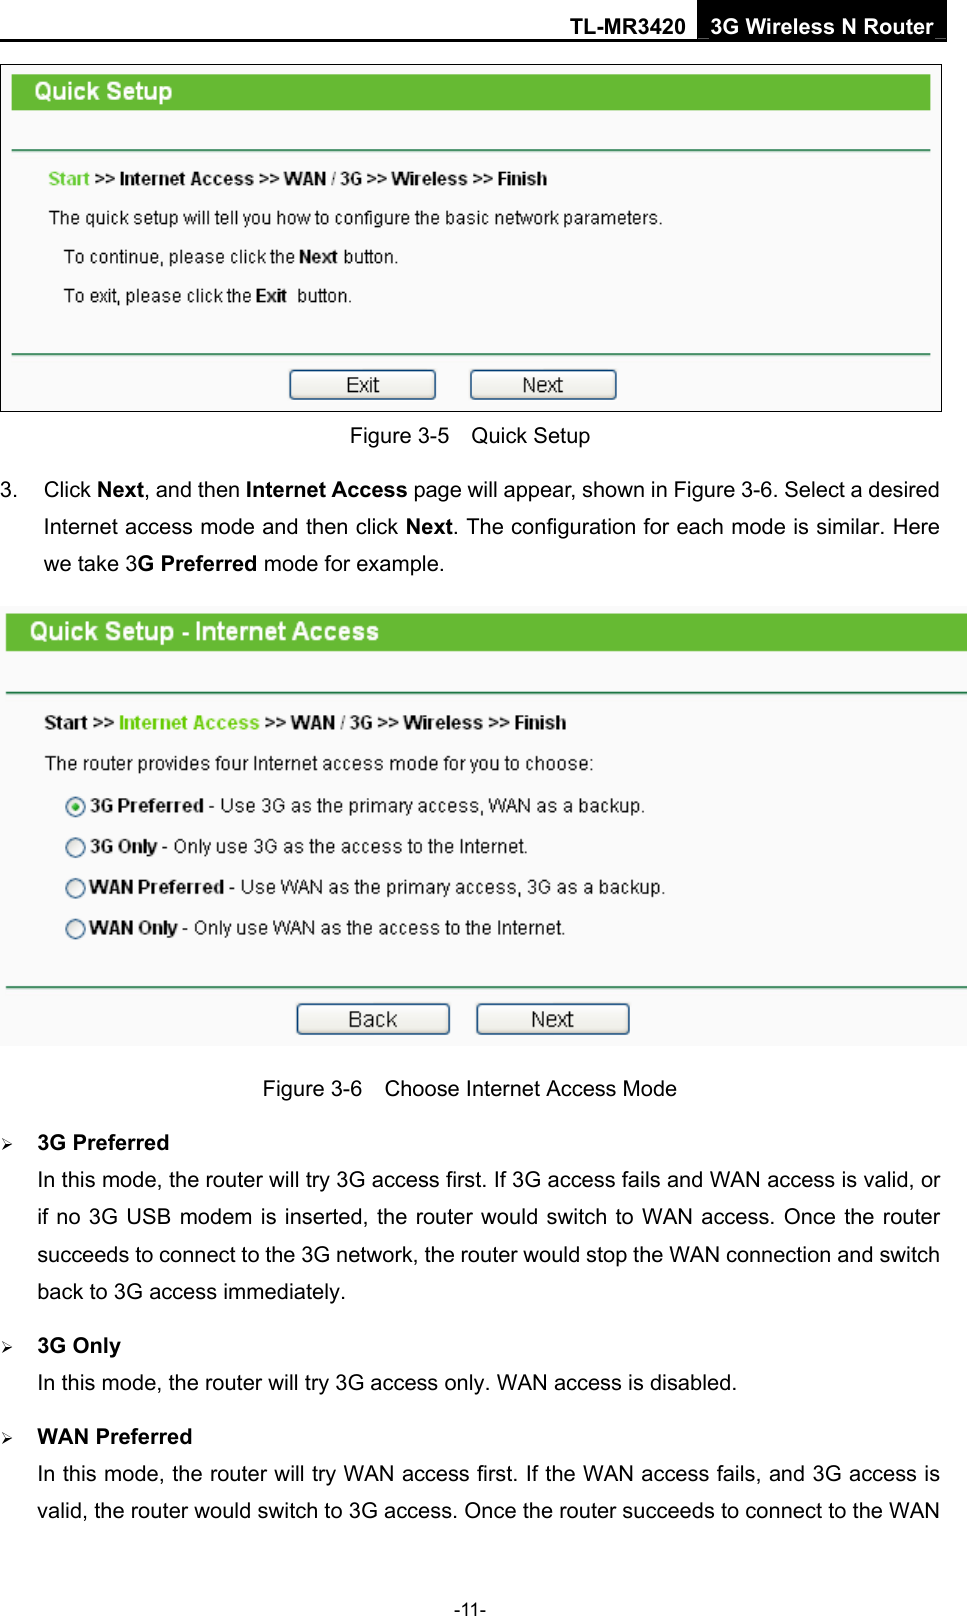 TL-MR3420 3G Wireless N Router -11-  Figure 3-5  Quick Setup 3. Click Next, and then Internet Access page will appear, shown in Figure 3-6. Select a desired Internet access mode and then click Next. The configuration for each mode is similar. Here we take 3G Preferred mode for example.  Figure 3-6    Choose Internet Access Mode ¾ 3G Preferred In this mode, the router will try 3G access first. If 3G access fails and WAN access is valid, or if no 3G USB modem is inserted, the router would switch to WAN access. Once the router succeeds to connect to the 3G network, the router would stop the WAN connection and switch back to 3G access immediately. ¾ 3G Only In this mode, the router will try 3G access only. WAN access is disabled. ¾ WAN Preferred In this mode, the router will try WAN access first. If the WAN access fails, and 3G access is valid, the router would switch to 3G access. Once the router succeeds to connect to the WAN 